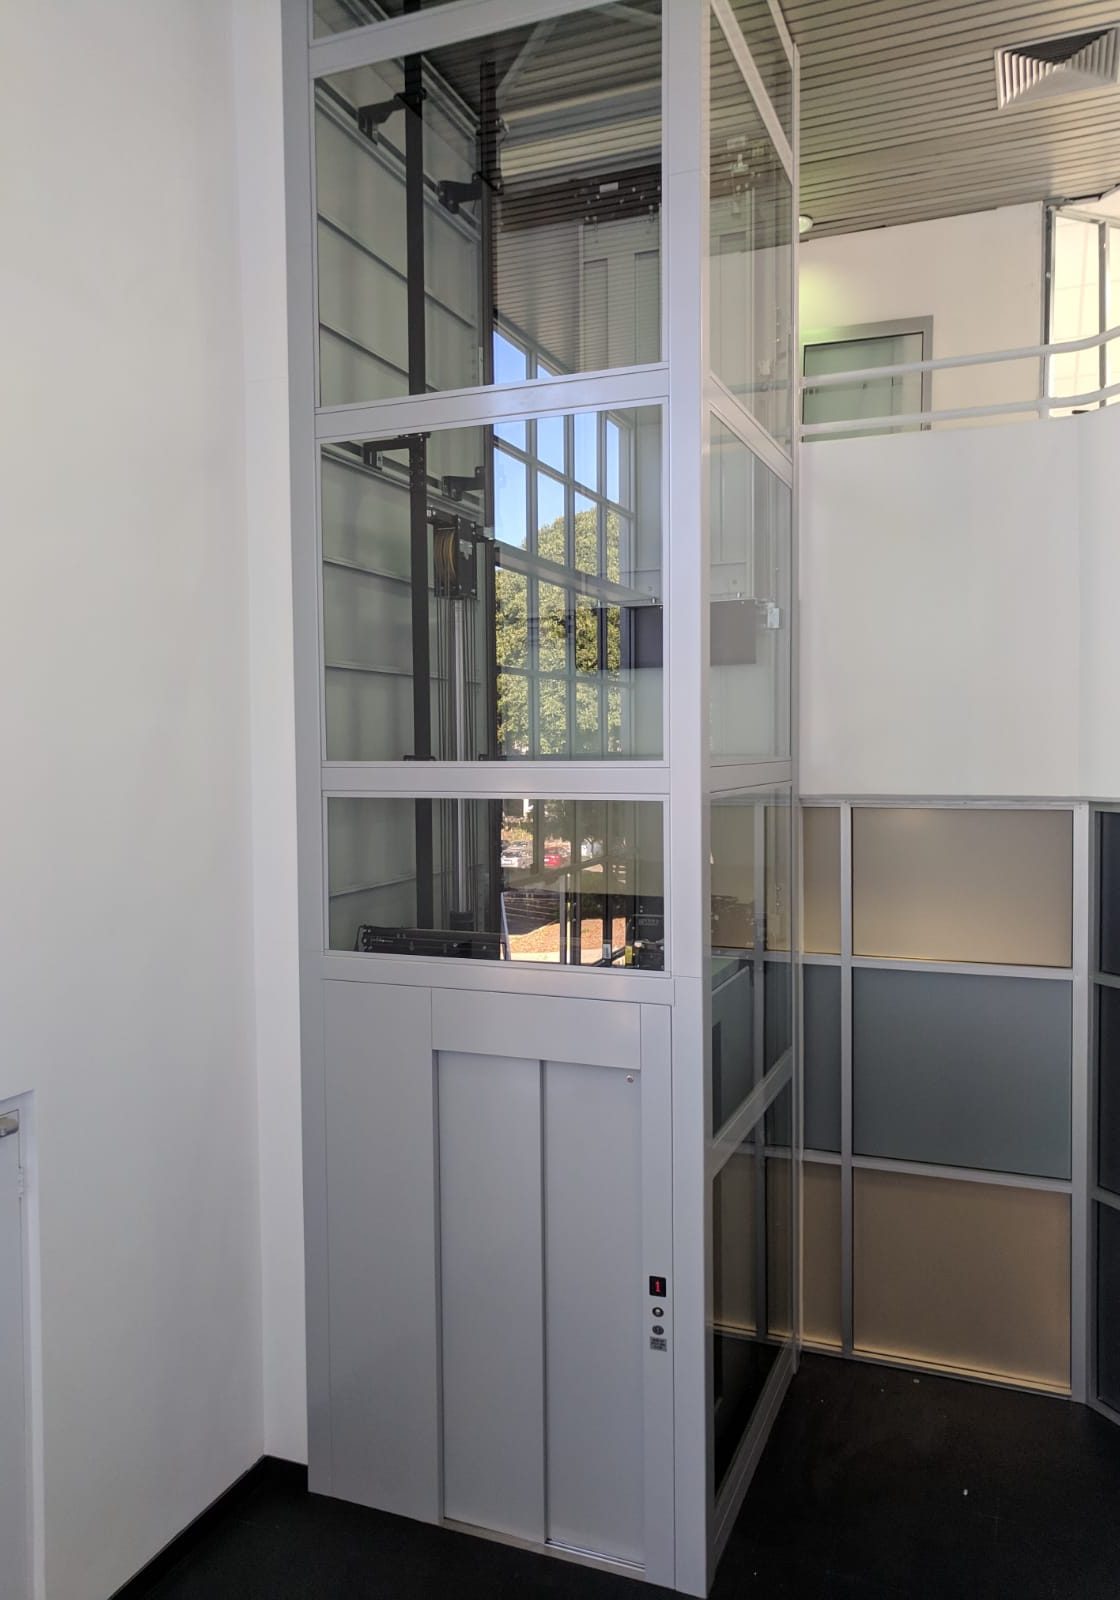 A DDA Compliant retrofitted lift with glass panels